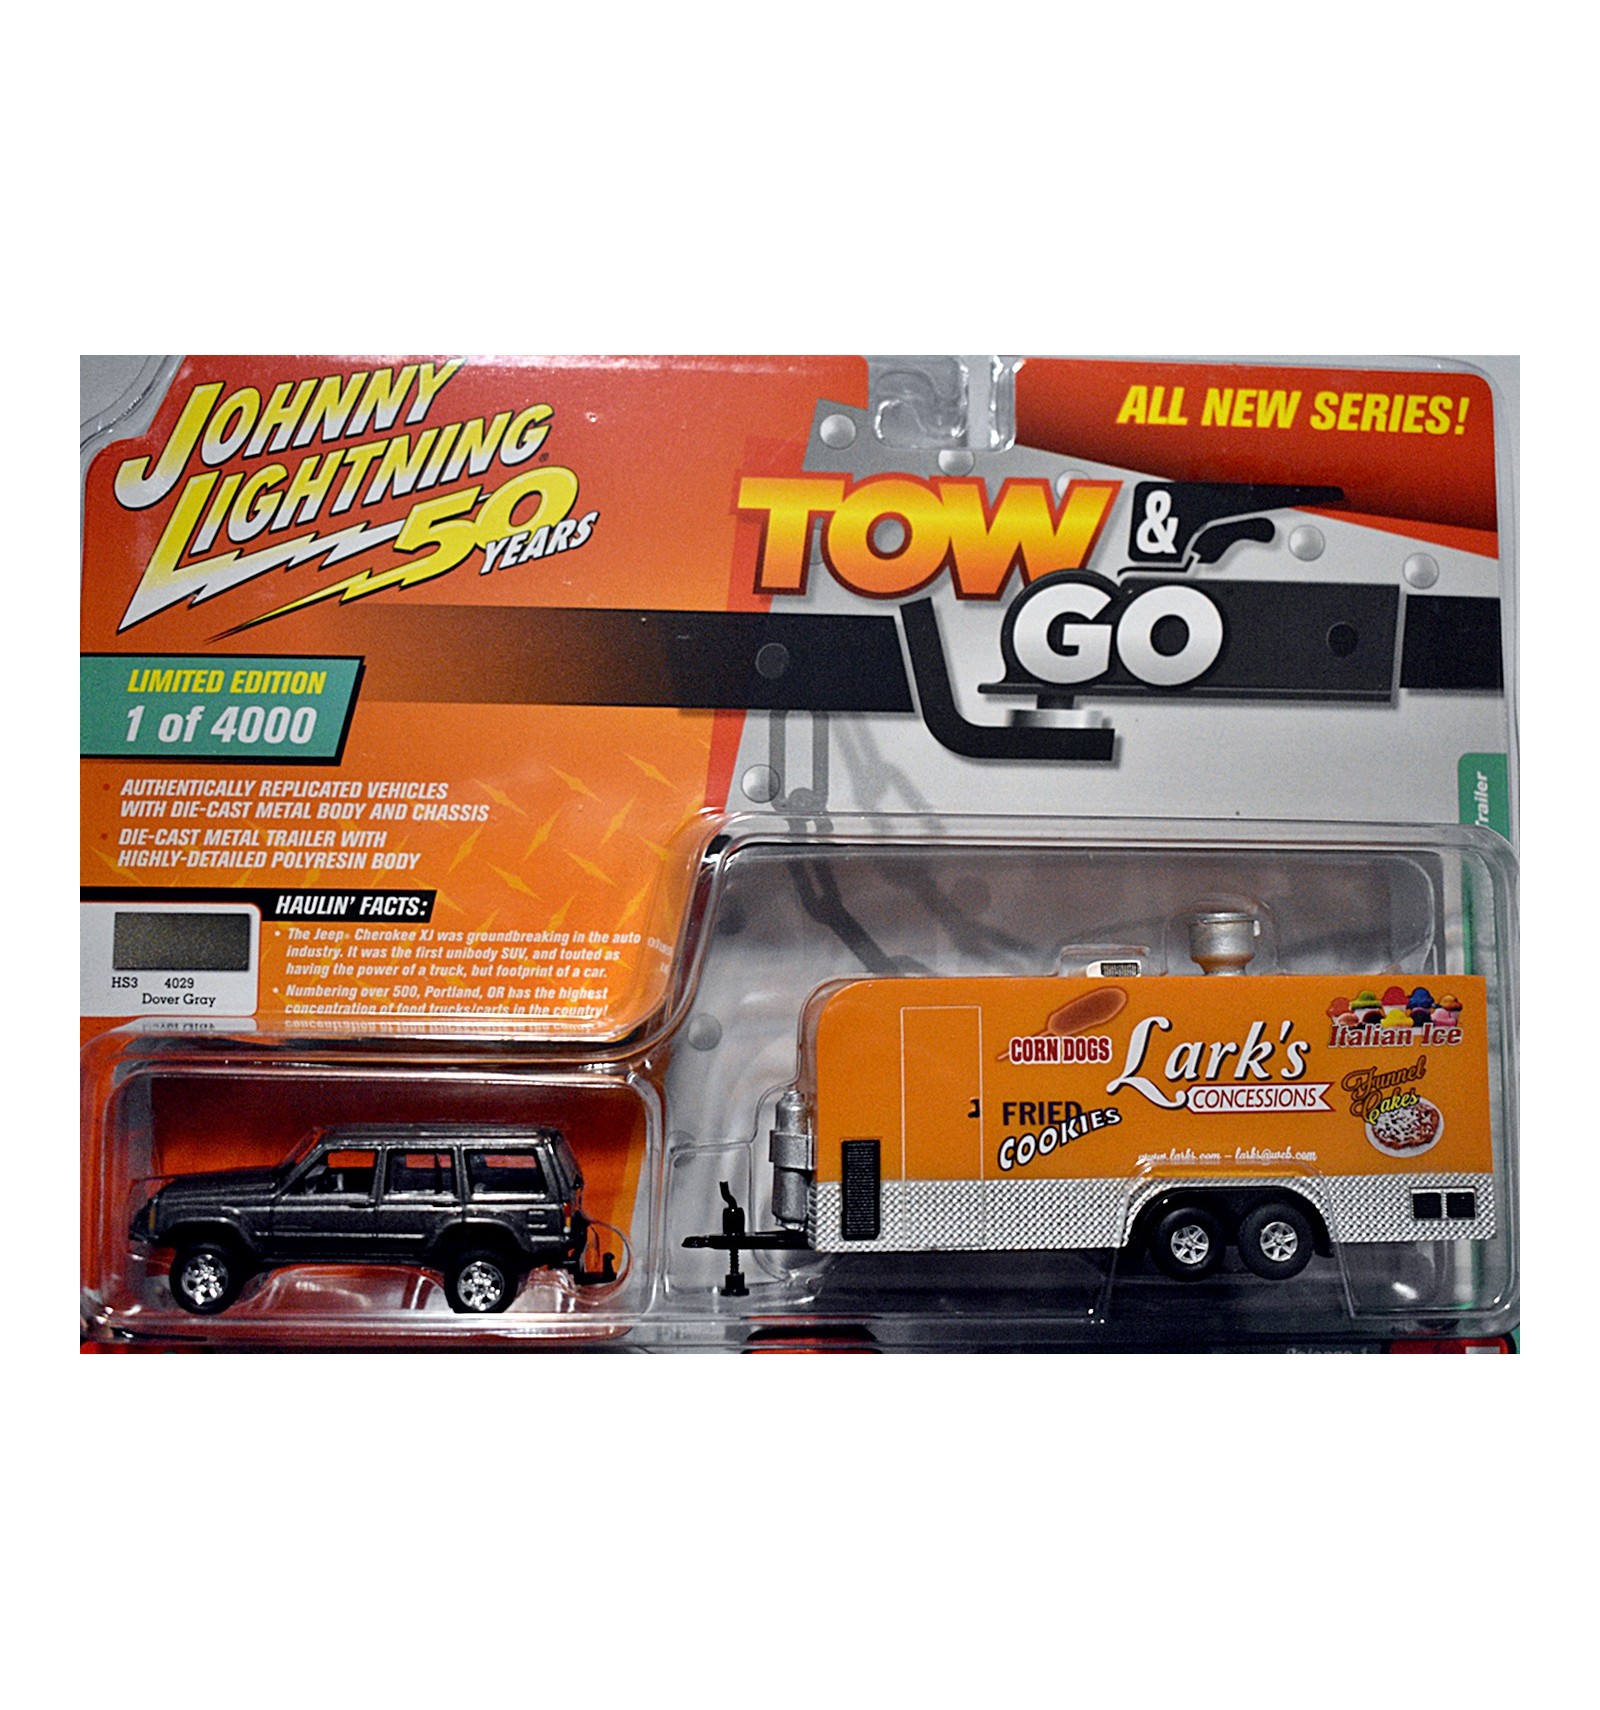 Jeep Cherokee XJ & Larks Concessions Carnival Trailer Johnny Lightning Tow & Go